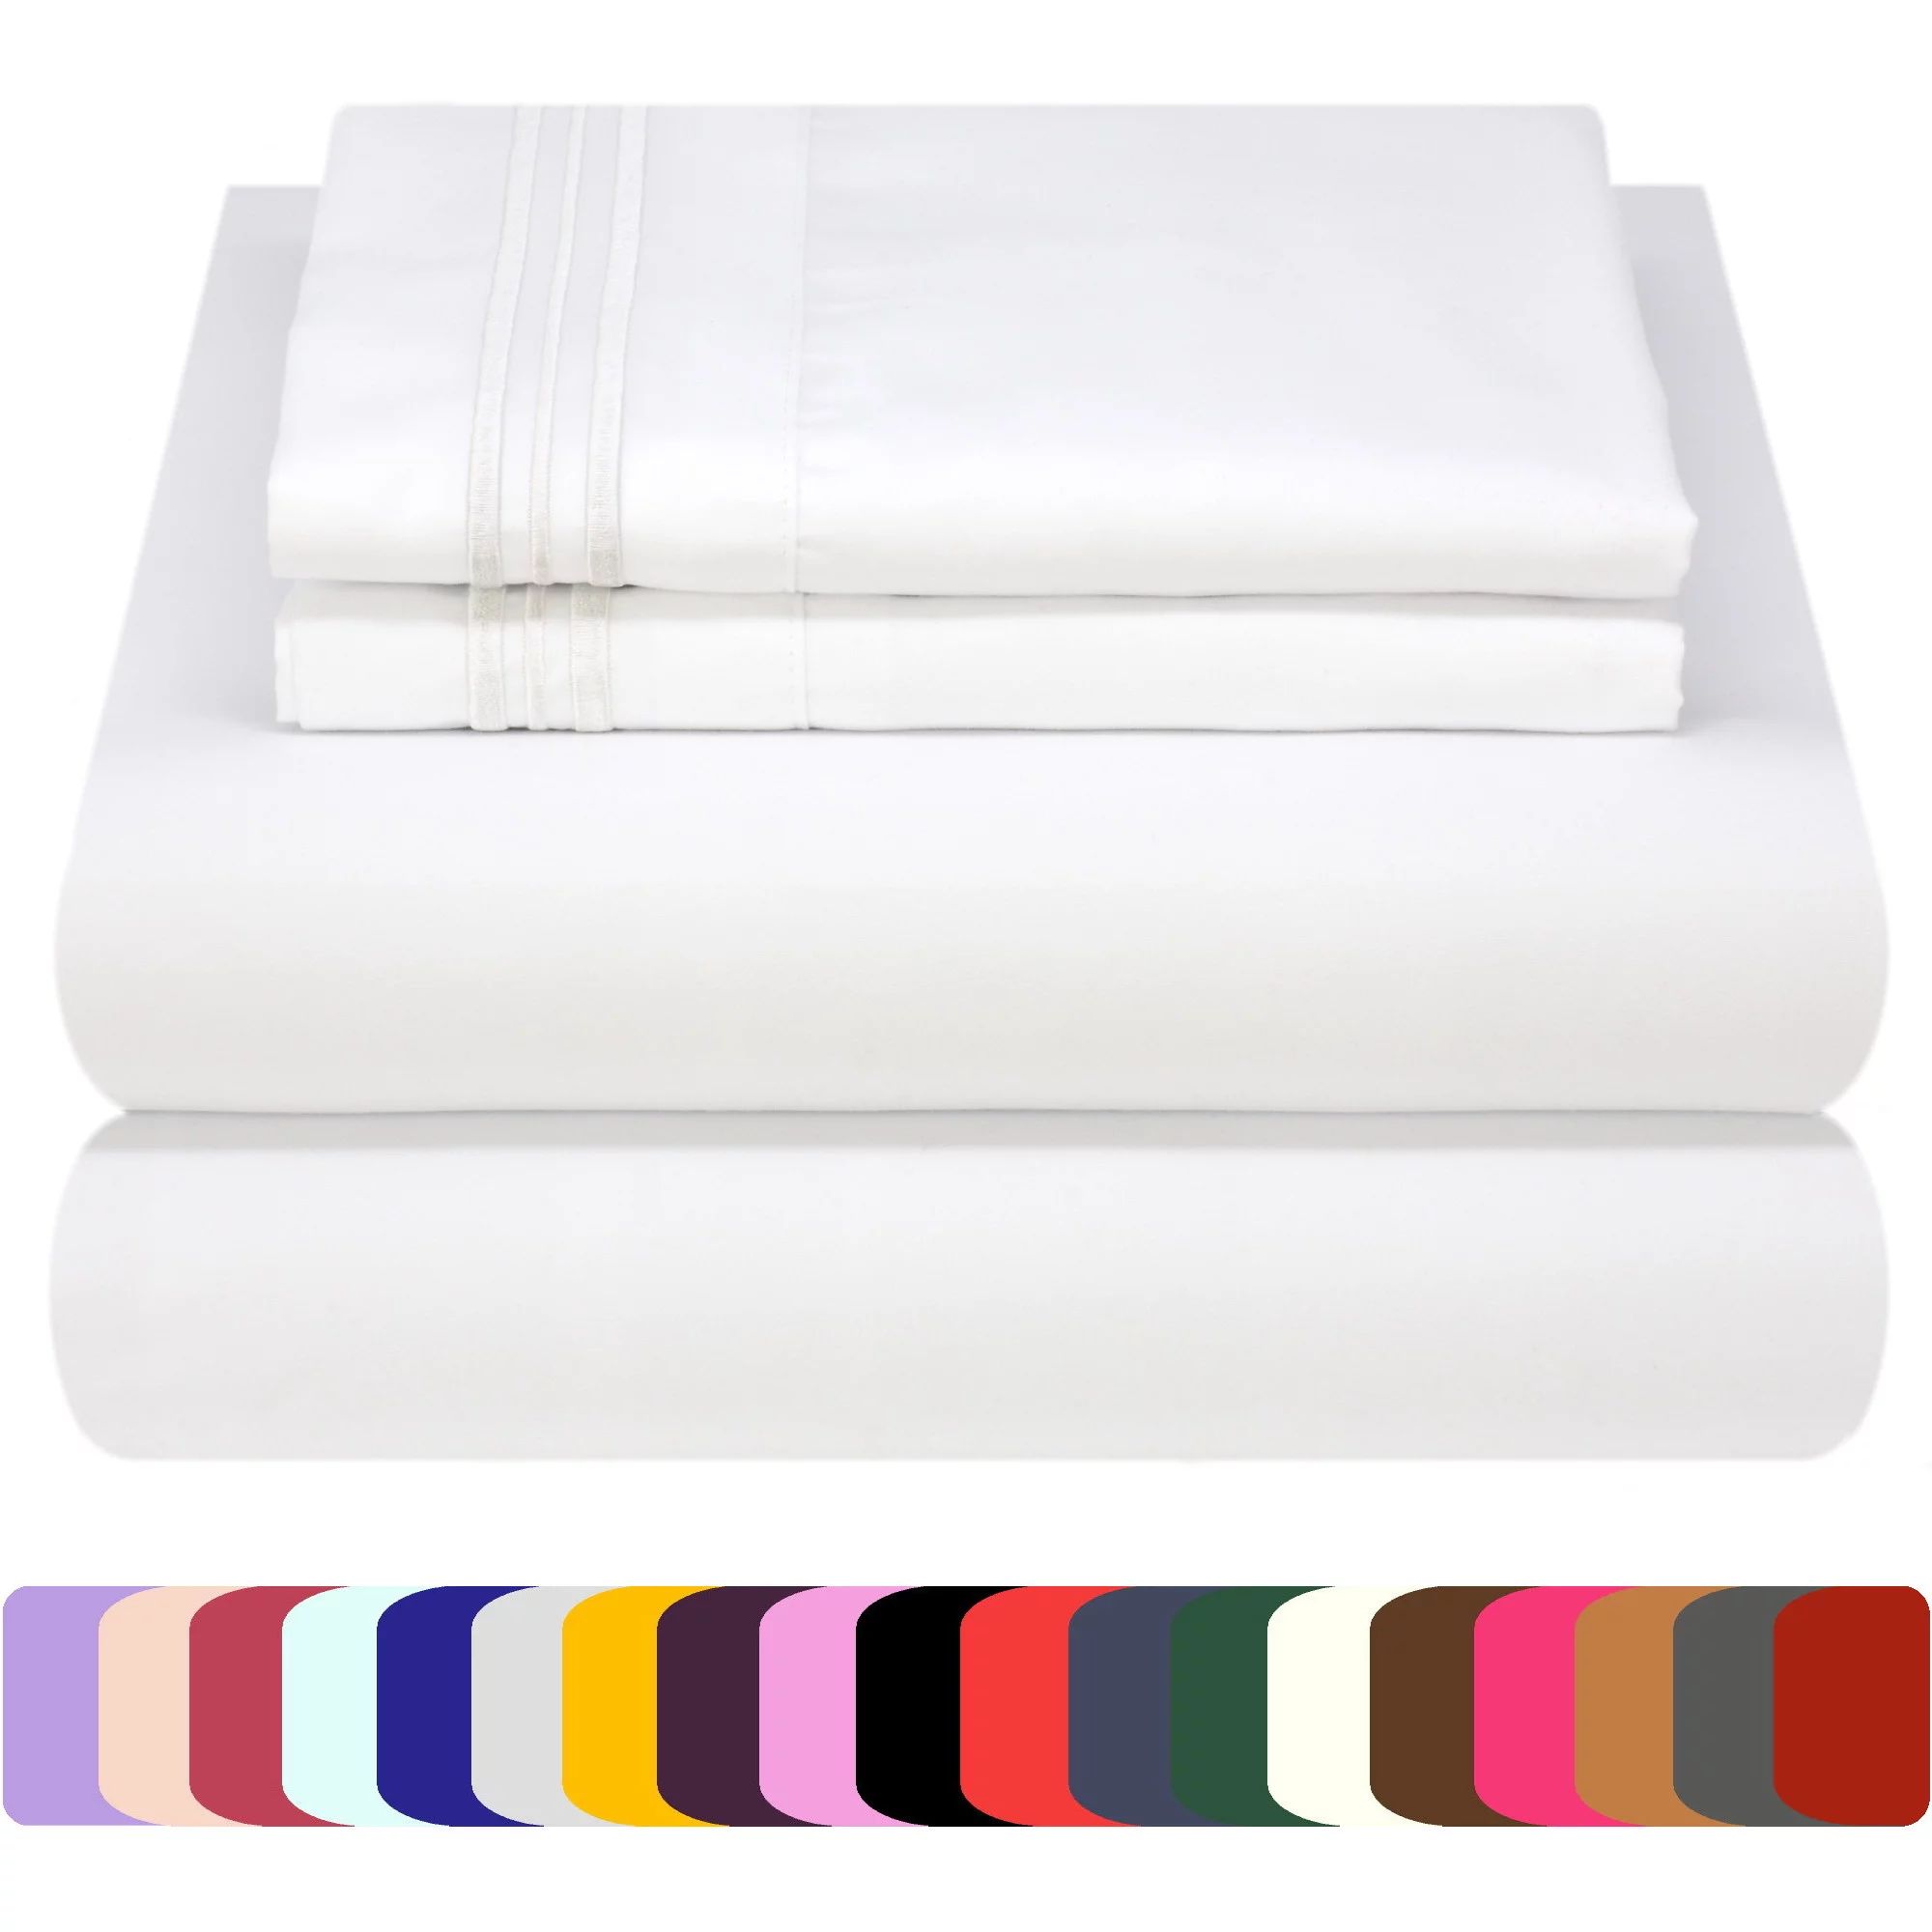 Mezzati Luxury 1800 Prestige Soft and Comfortable Collection Bed Sheets Set Queen White | Walmart (US)